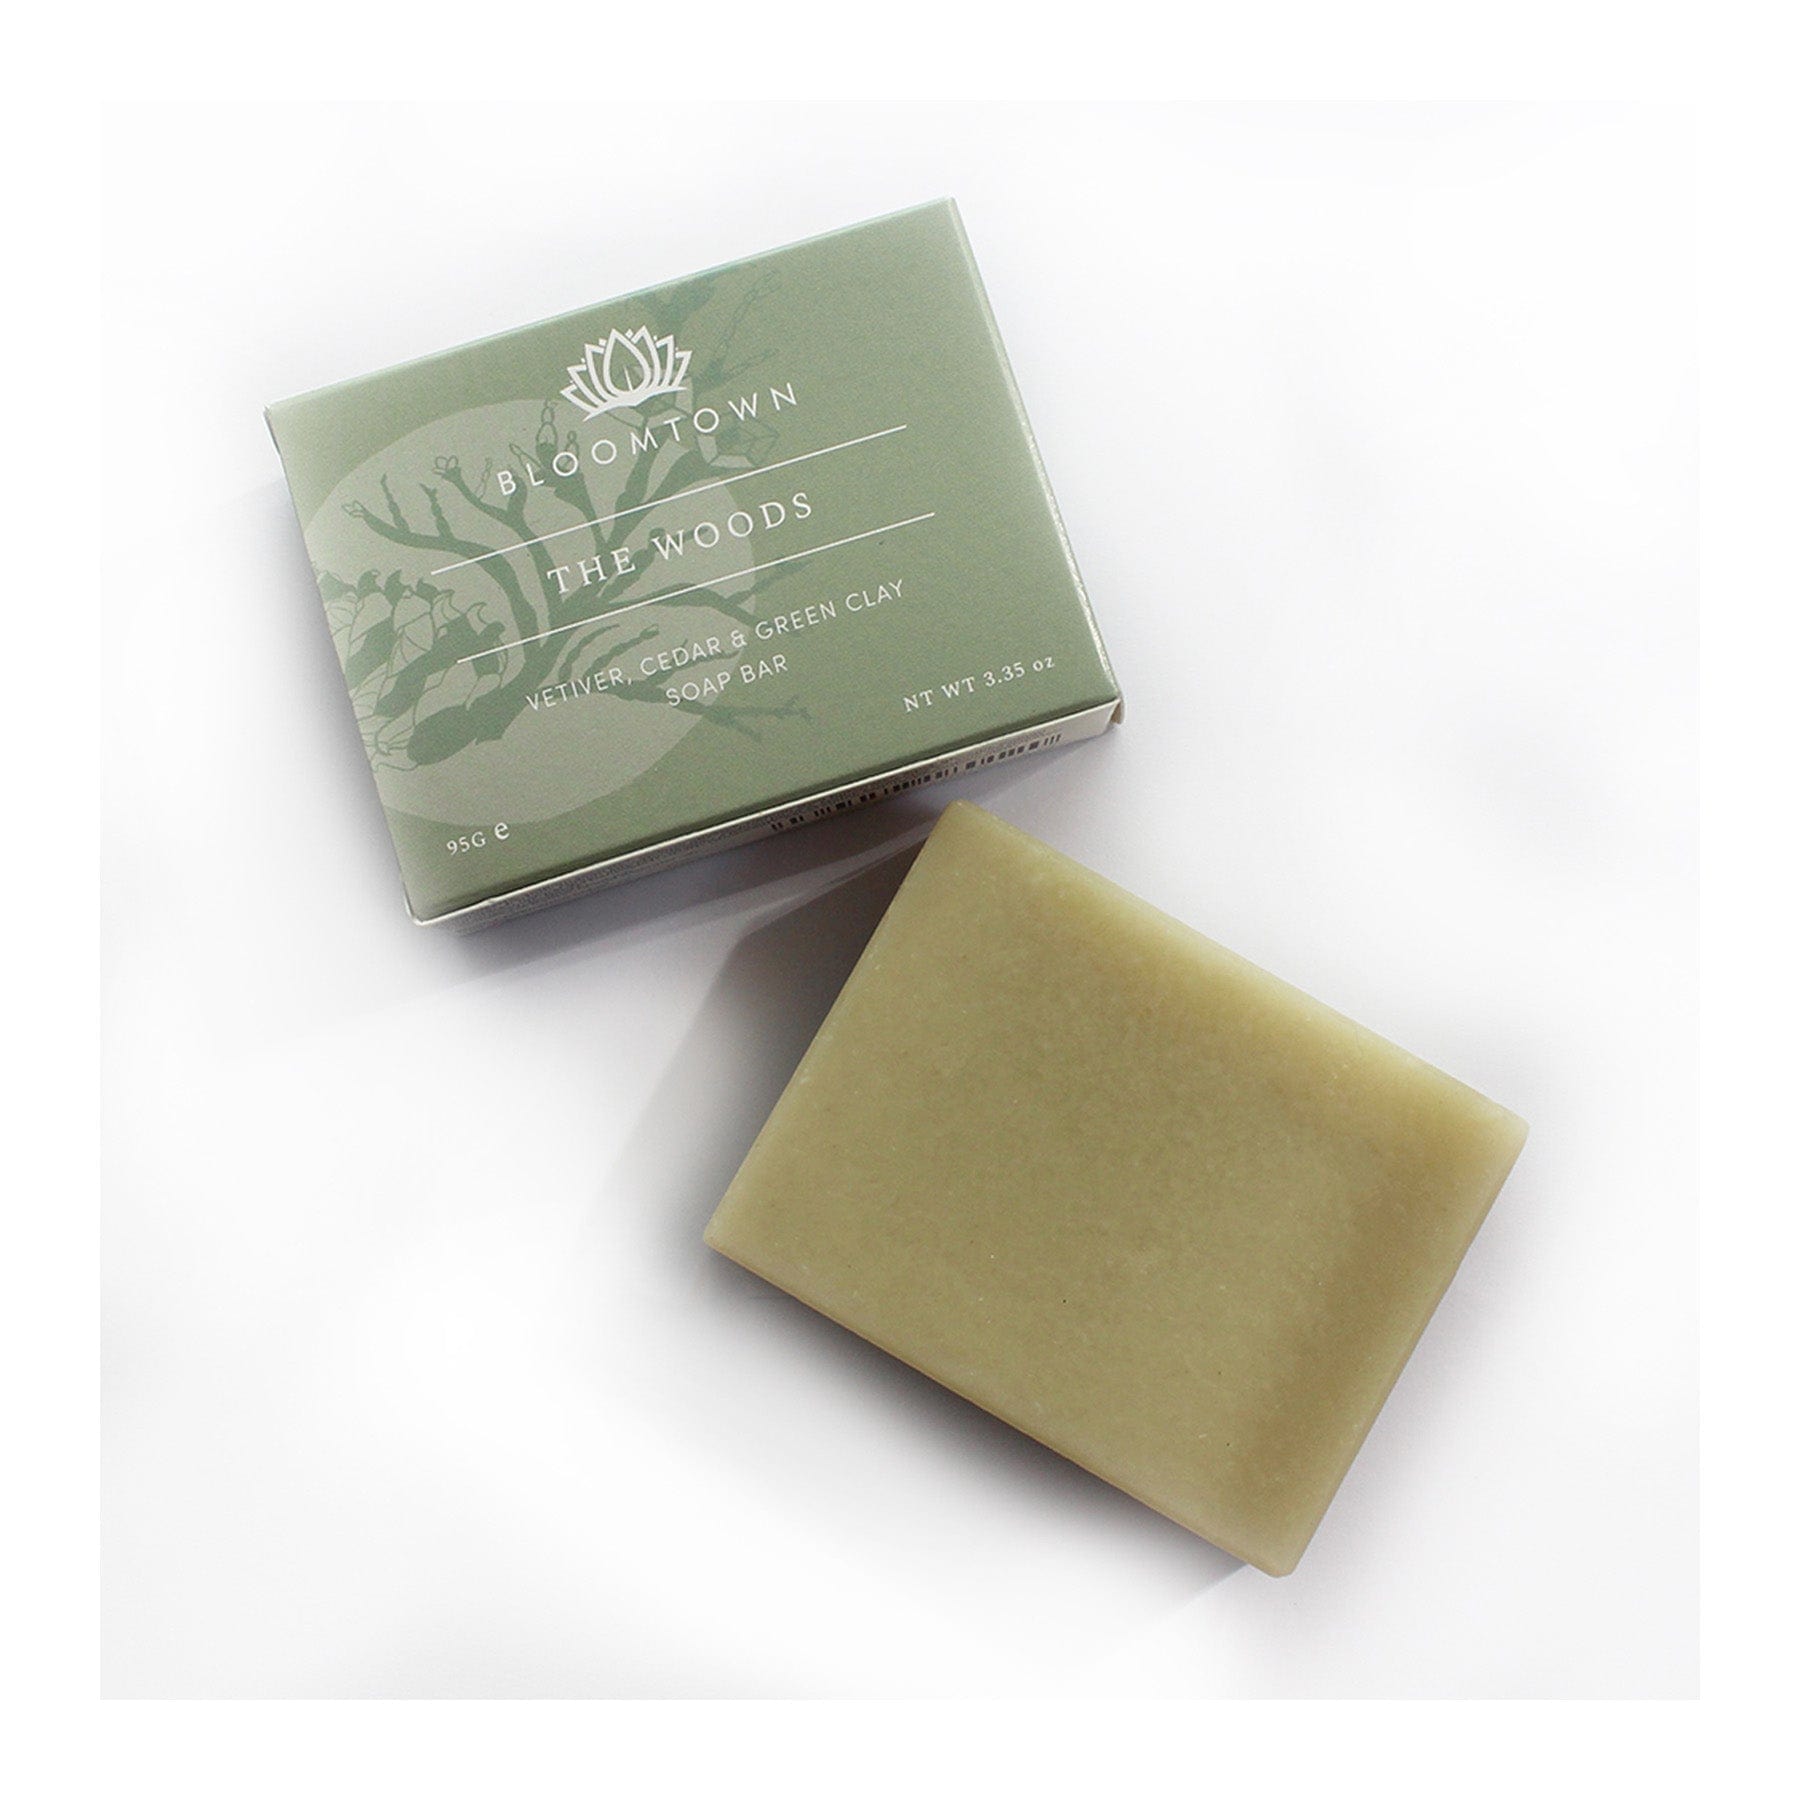 Bloomtown The Woods vetiver, cedar and green clay soap bar next to its packaging on white background